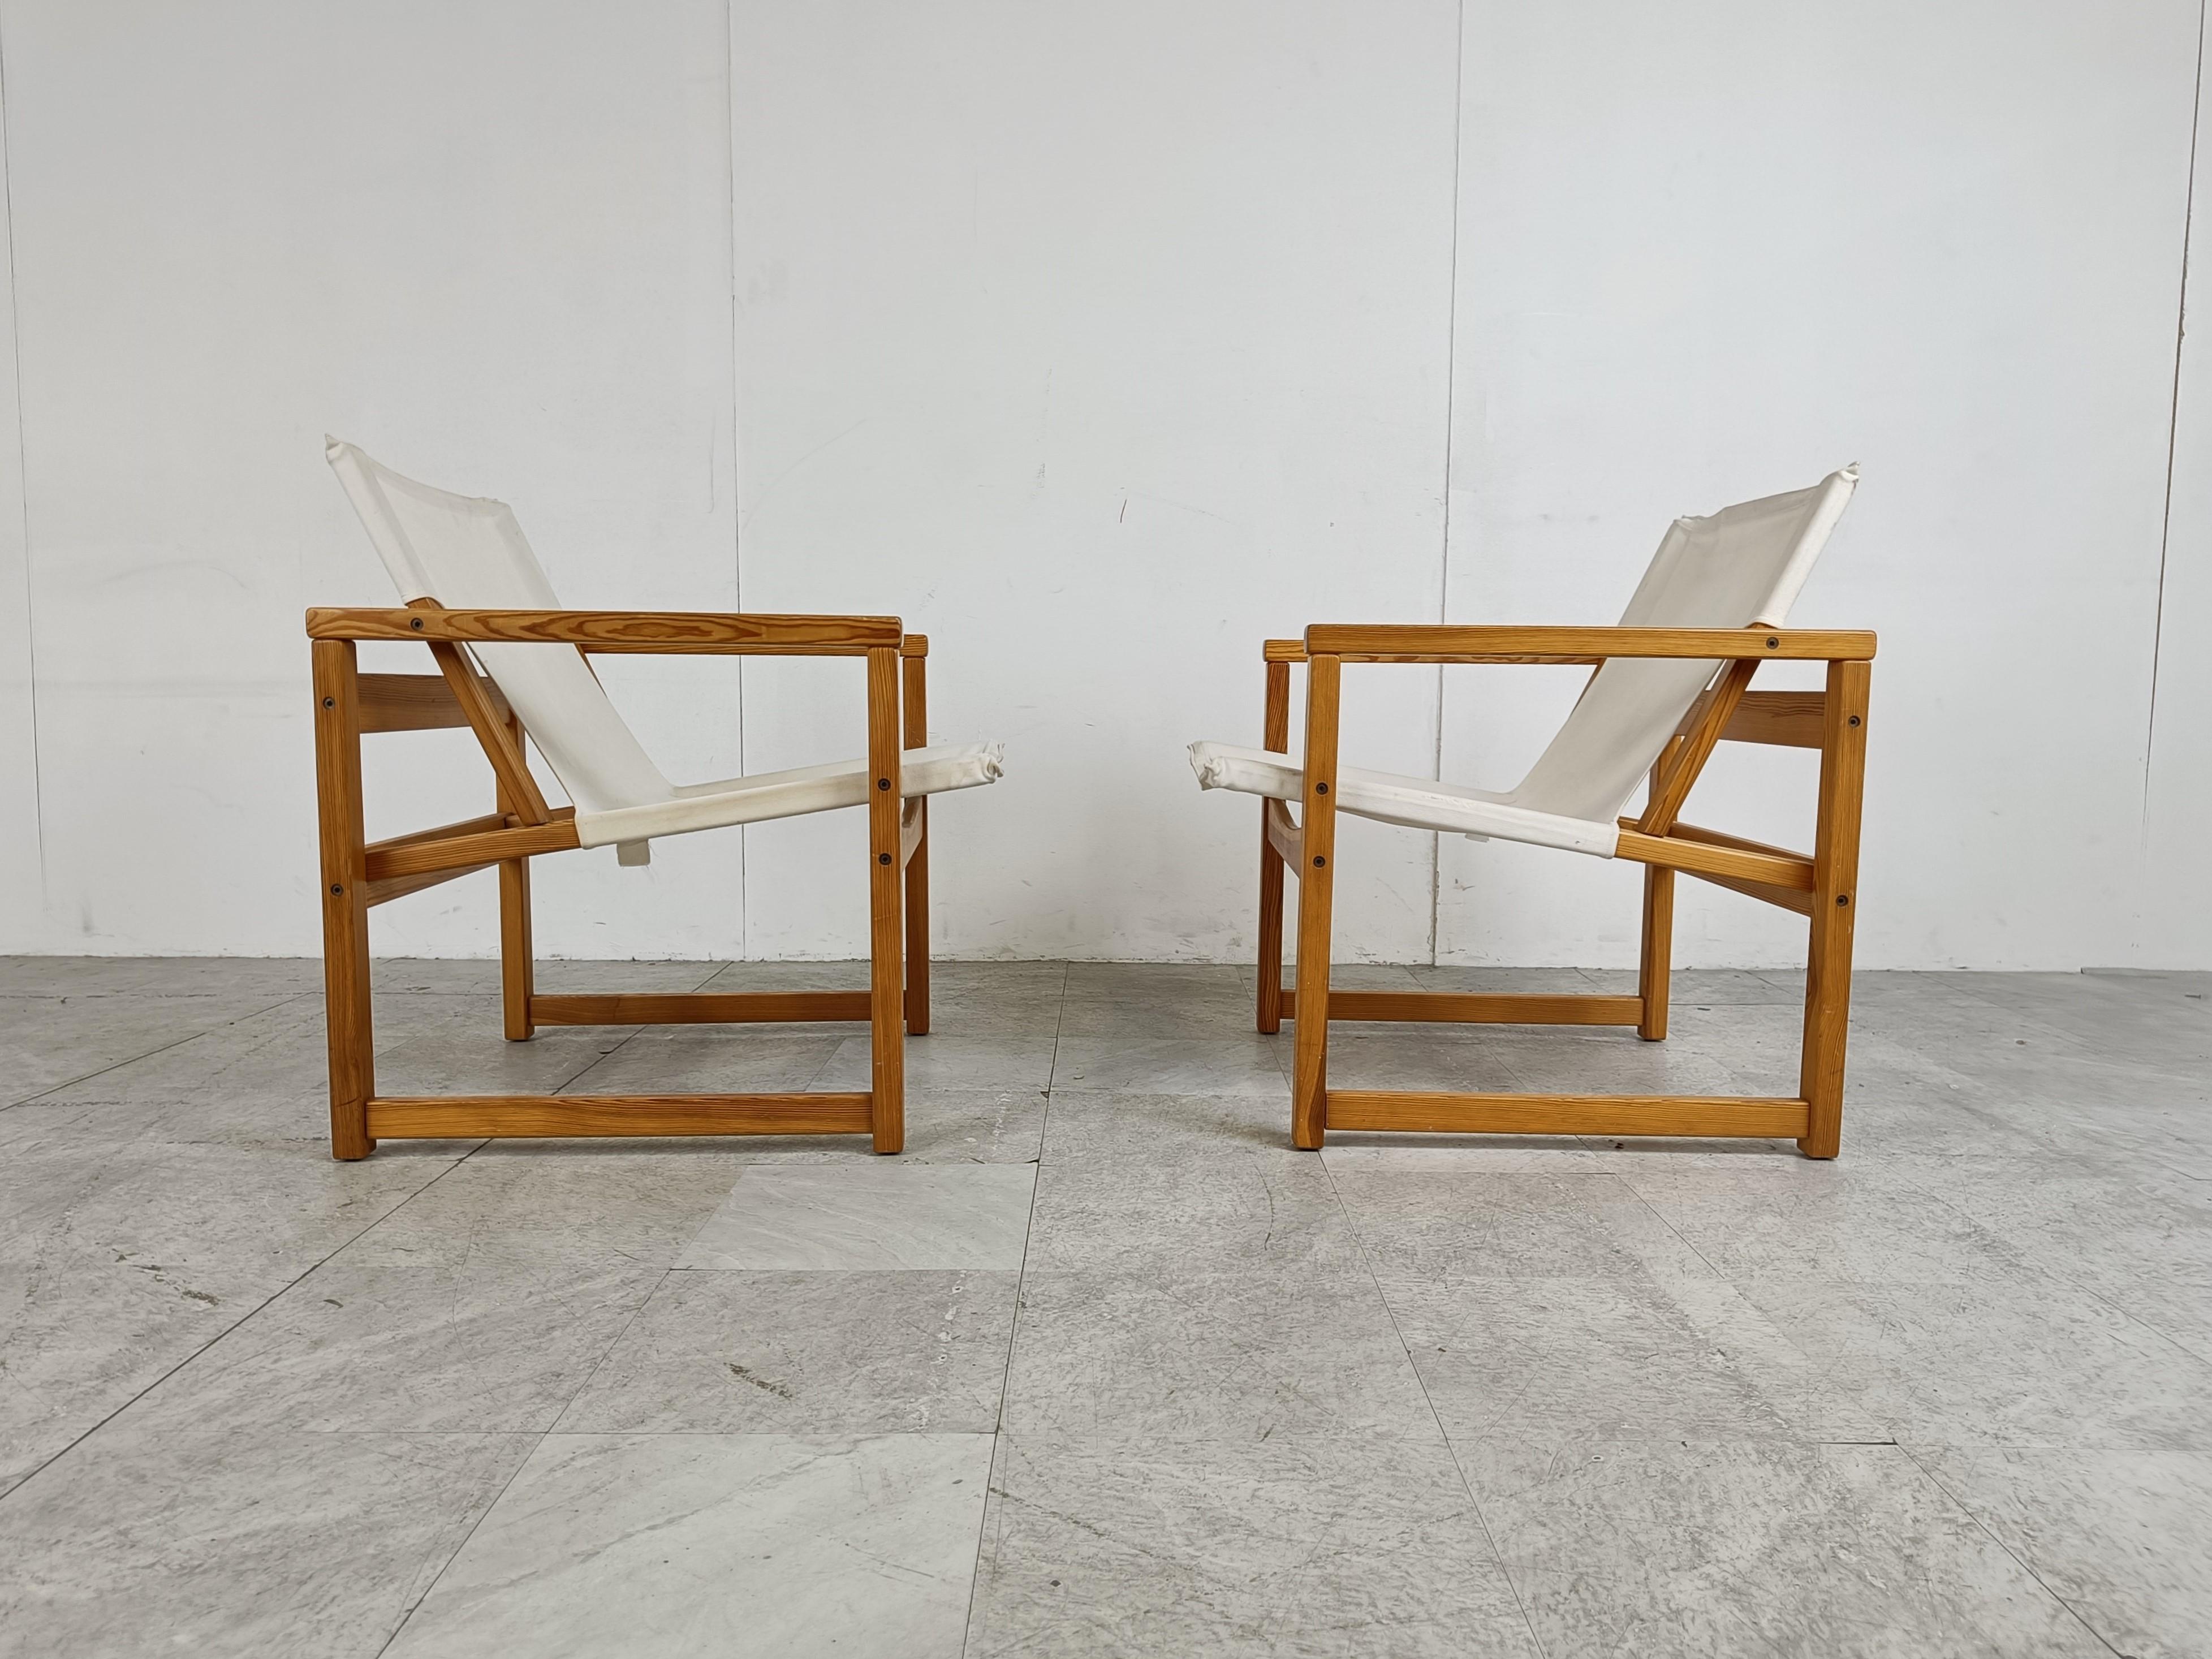 Late 20th Century Vintage Safari Chairs by Tord Bjorlund for Ikea, 1980s